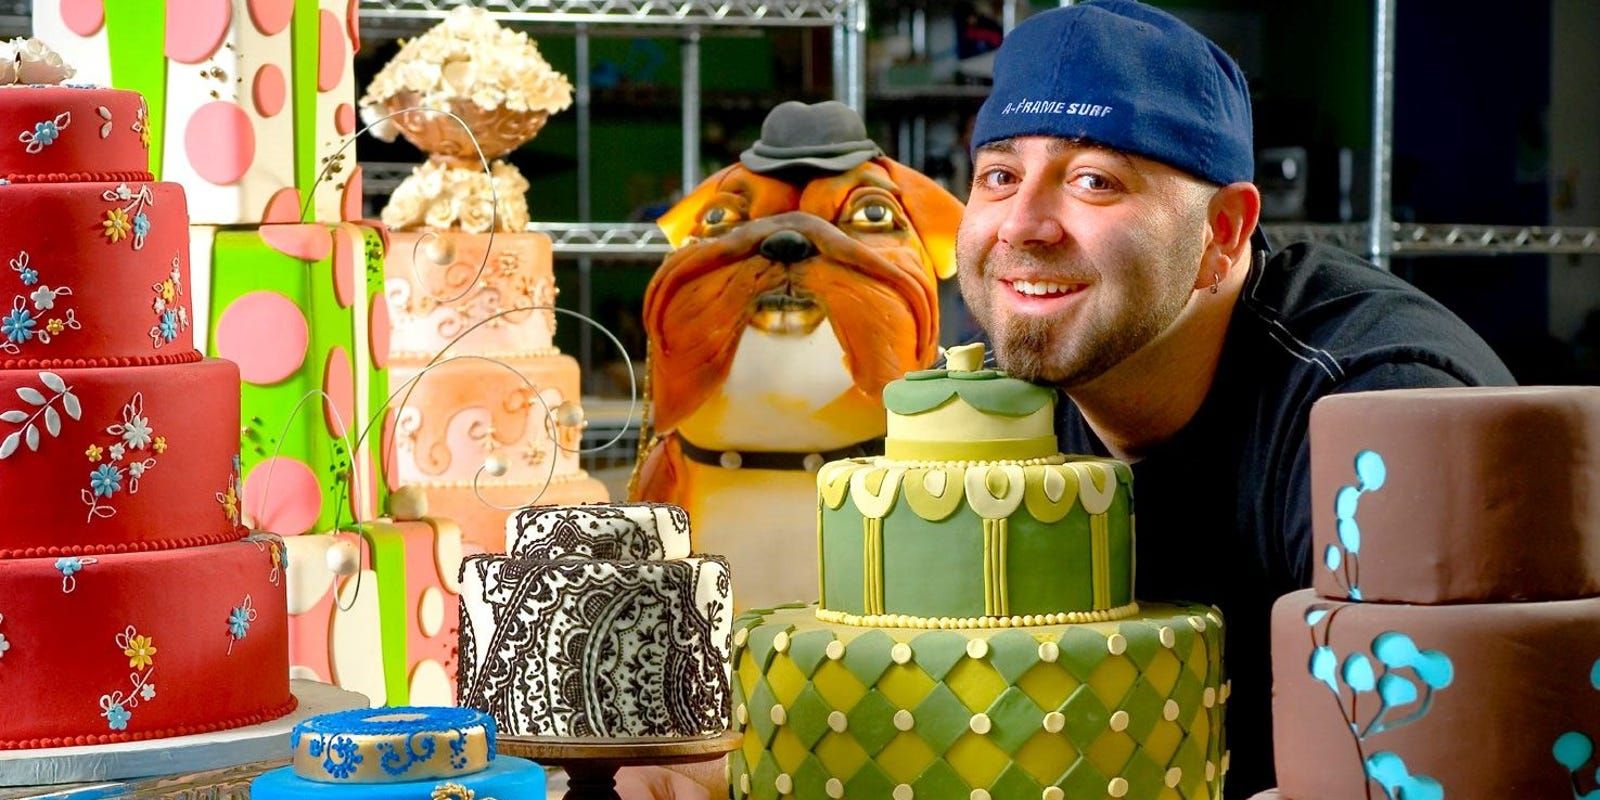 Goldman surrounded by cakes